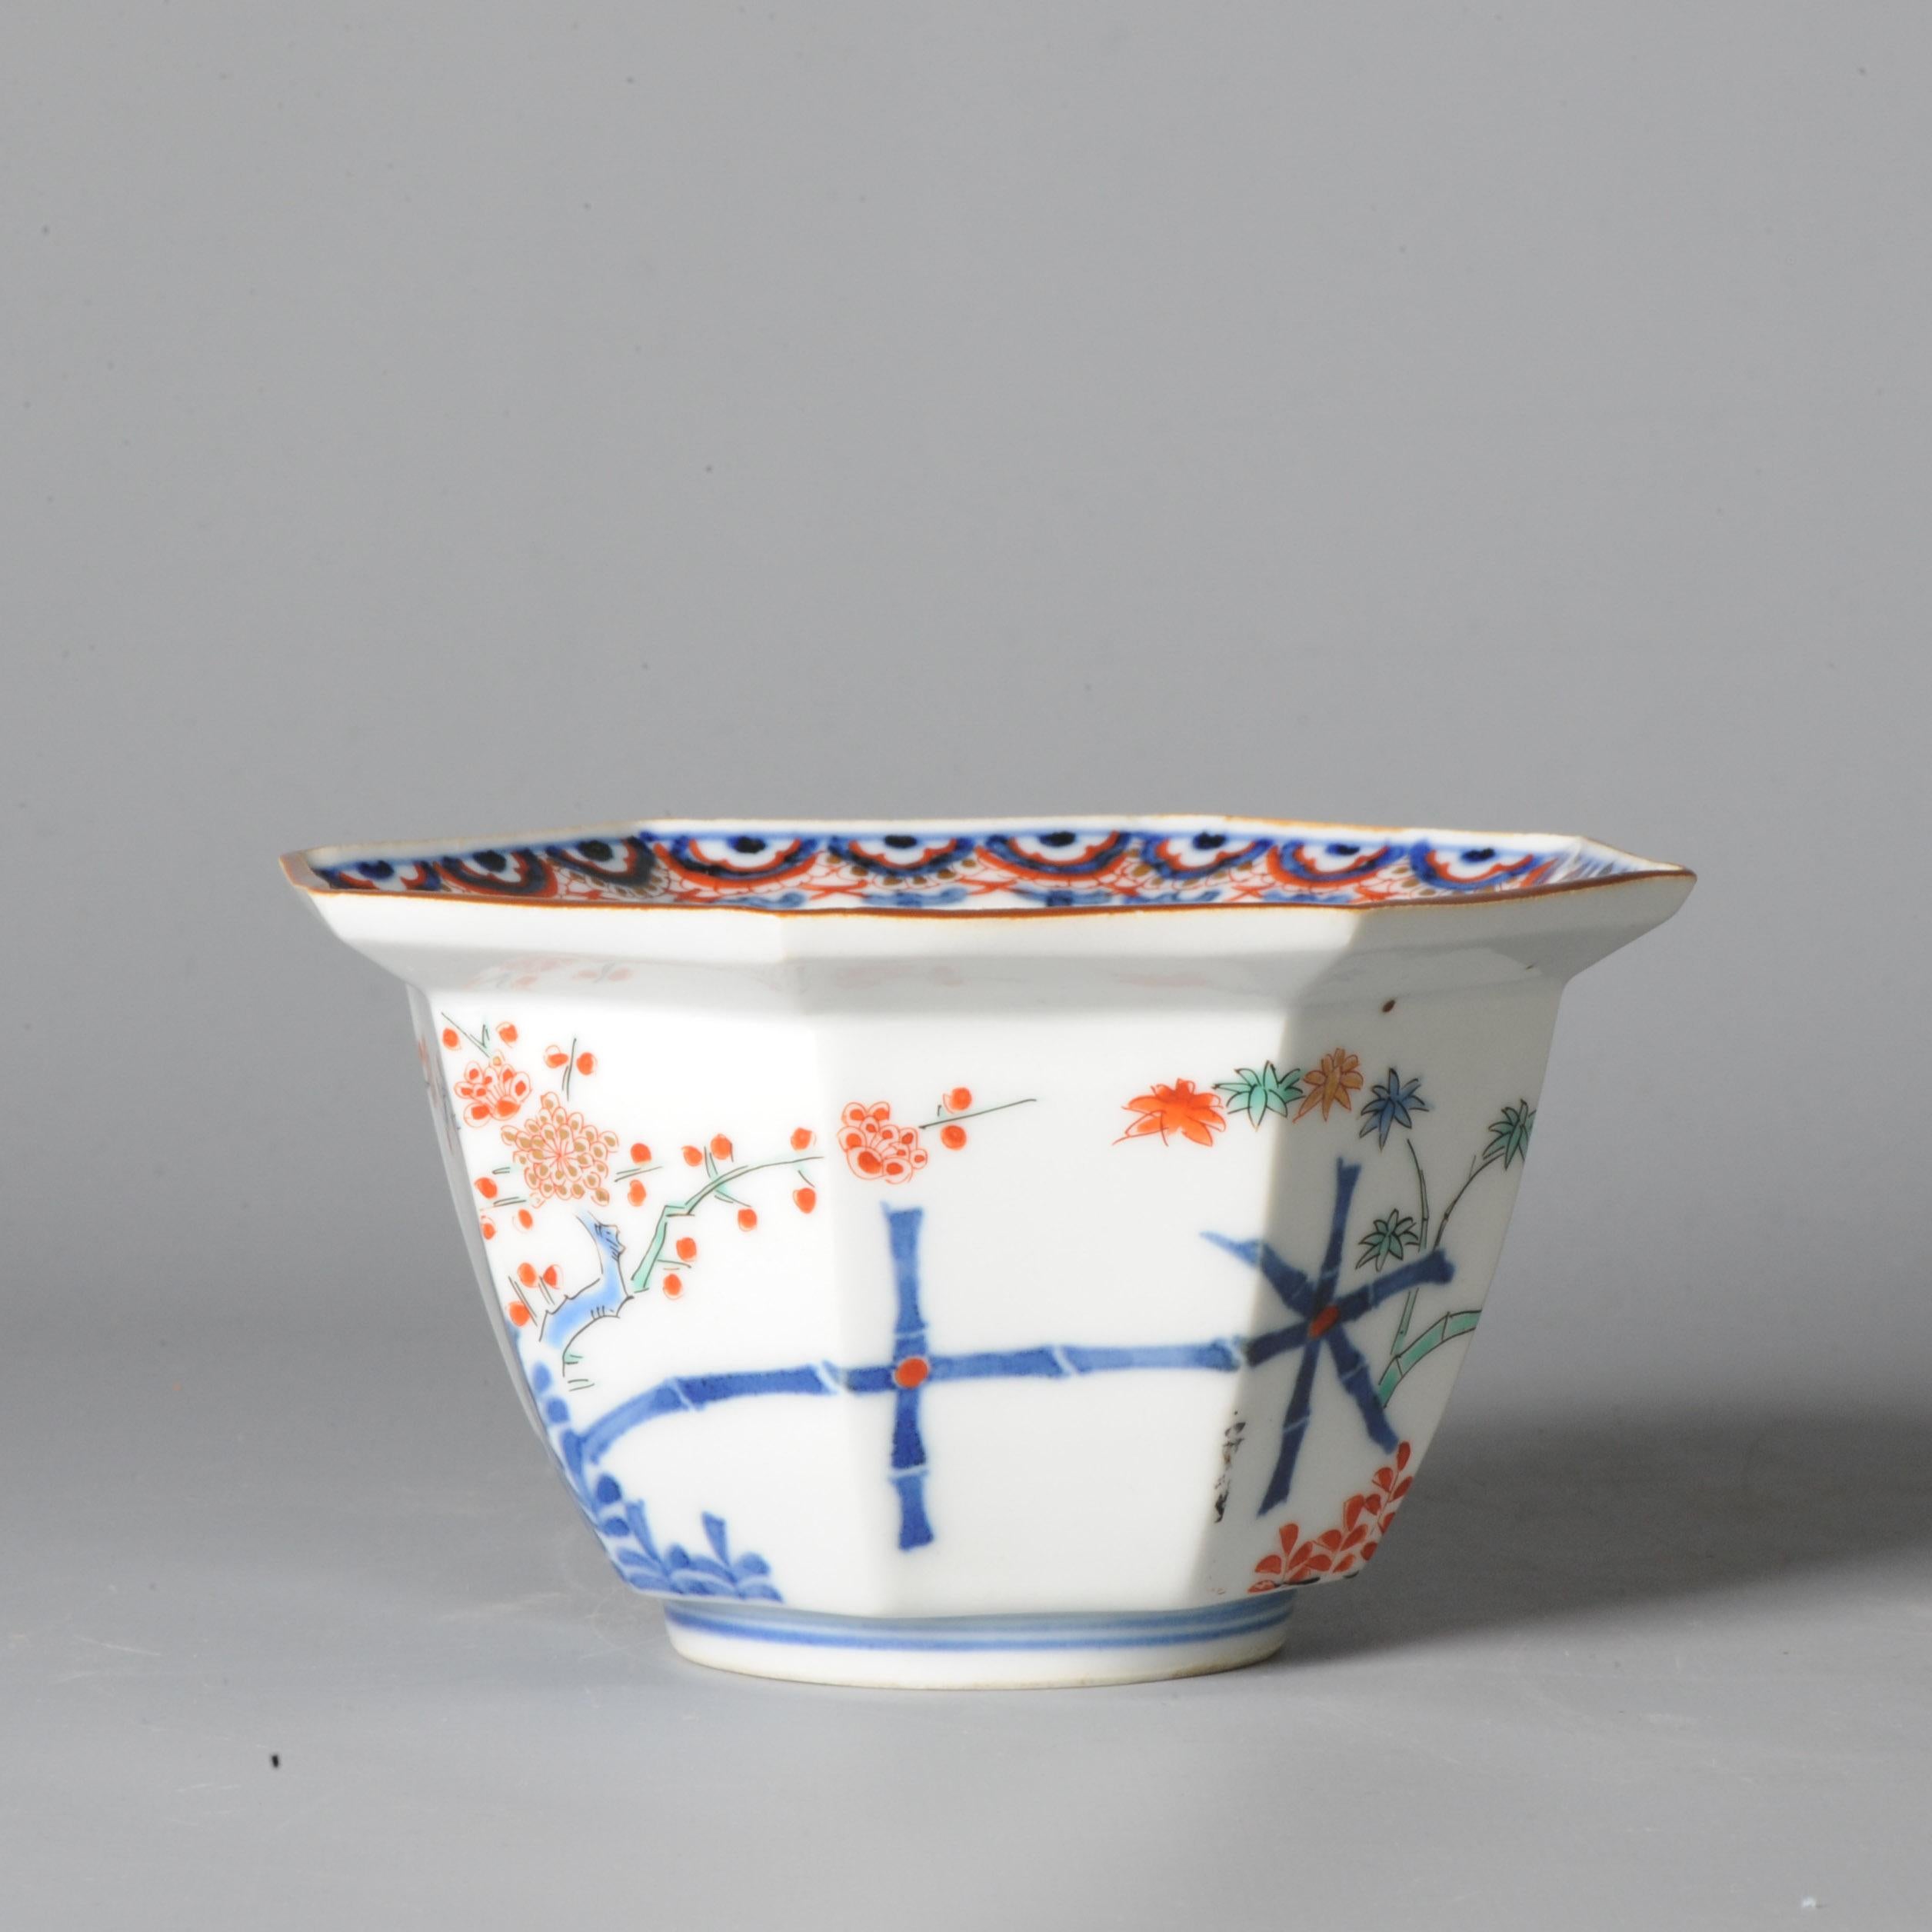 Sharing with you this very nice Edo period late 17th or early 18th century example in nice condition.
It is decorated with a scene of leafs, flowers and bamboo. Underglaze blue and over glaze other enamels.
Condition
1 small flee bite/frit to rim